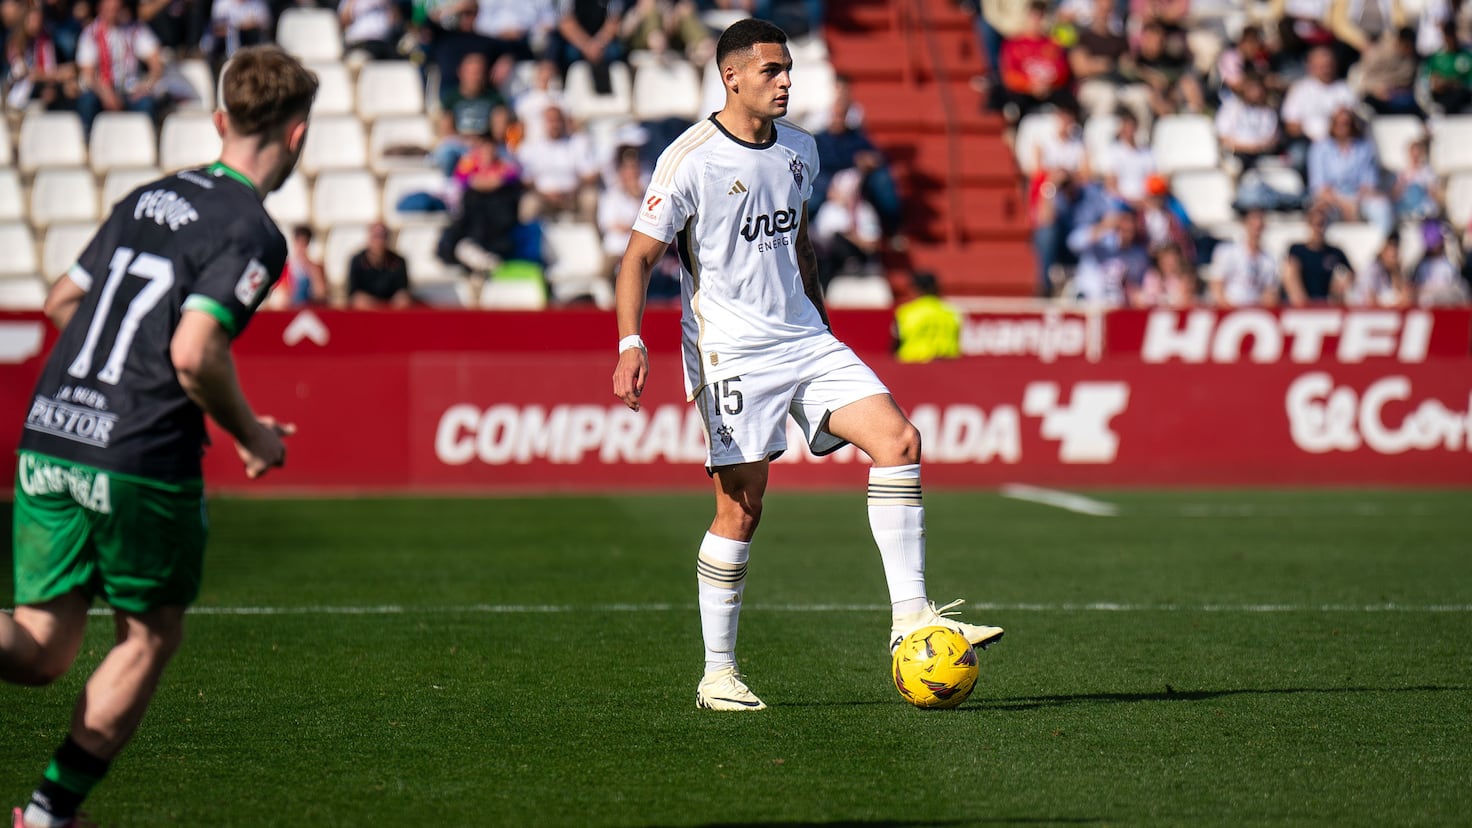 Albacete Faces Crucial Match Without Key Defender Ros and Goalkeeper Barragán